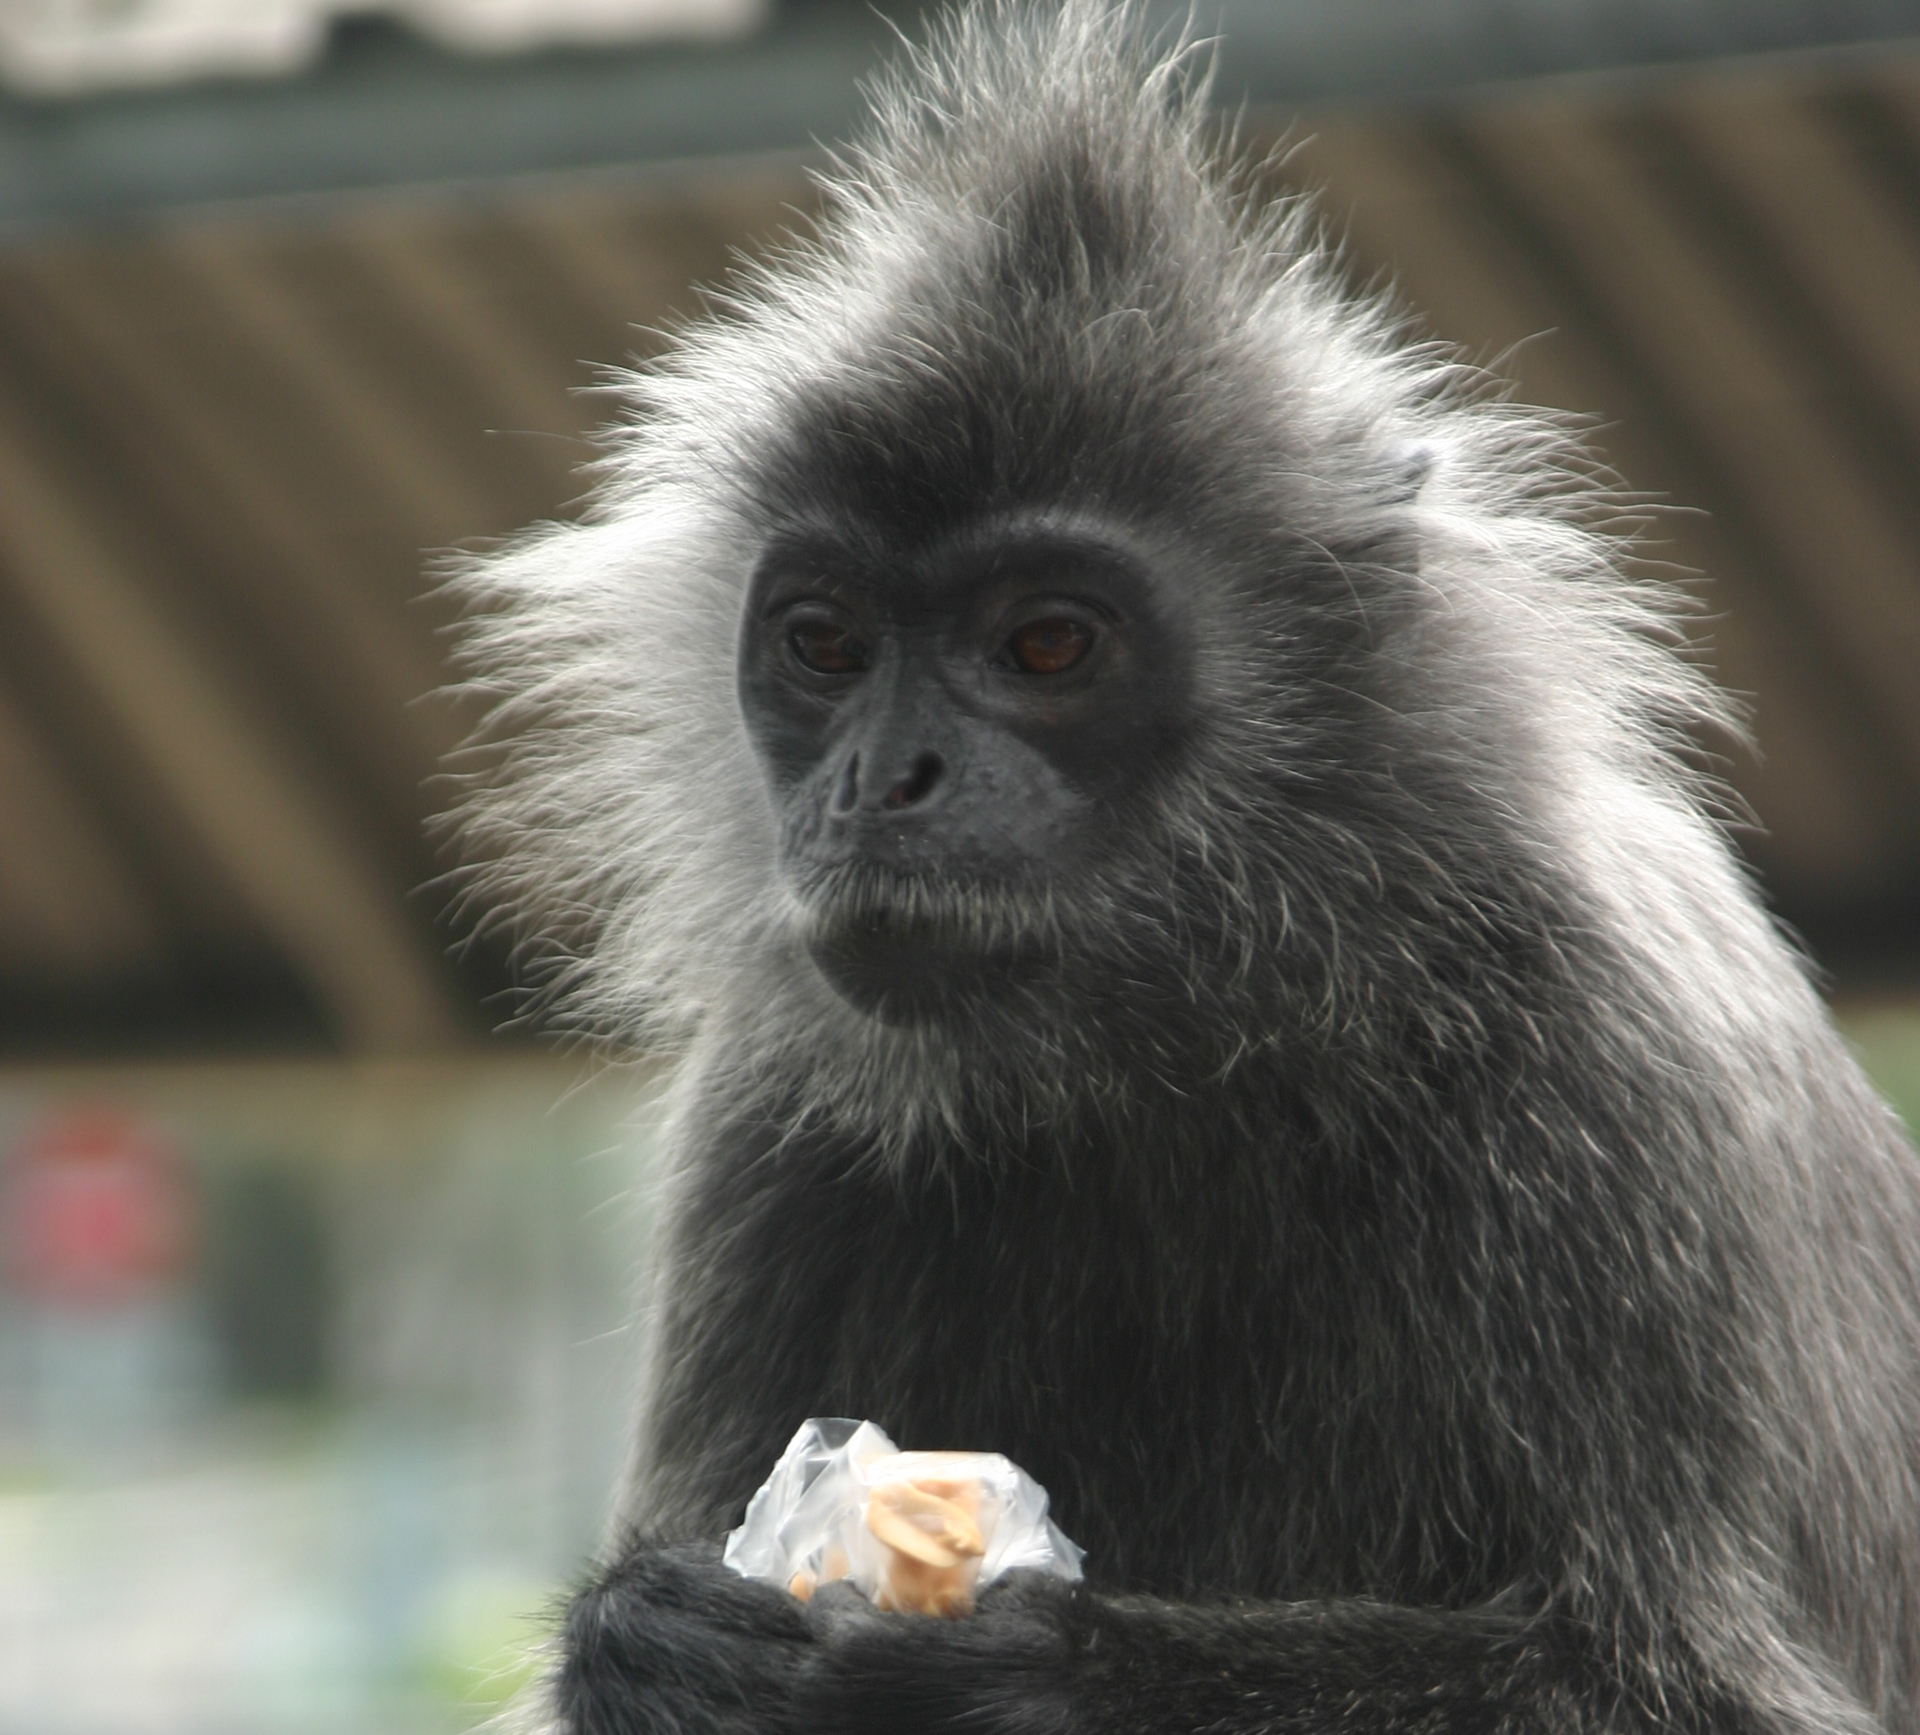 a monkey holding a piece of food